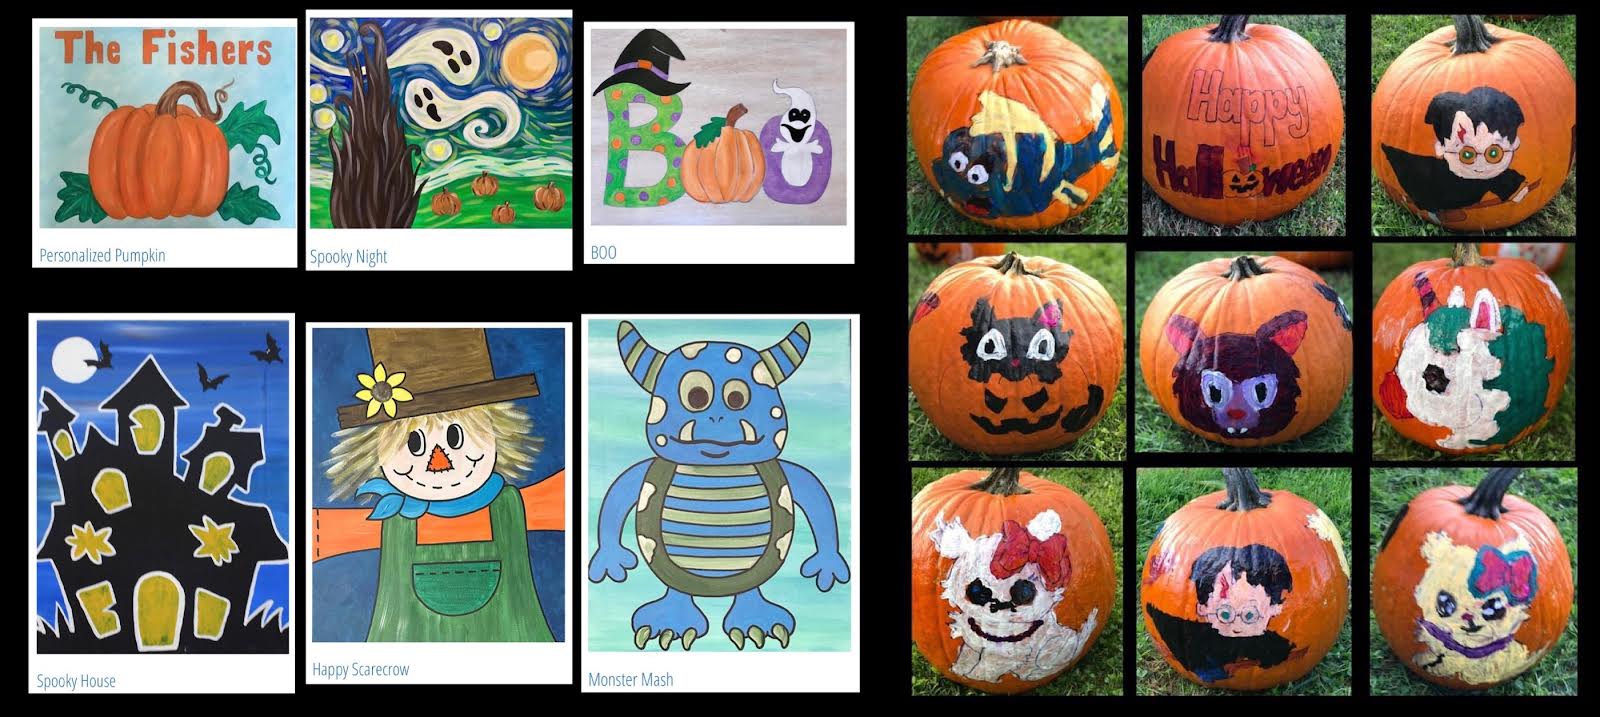 3:00 - 5:00pm Kids Pumpkin Painting and Canvas Paint Session